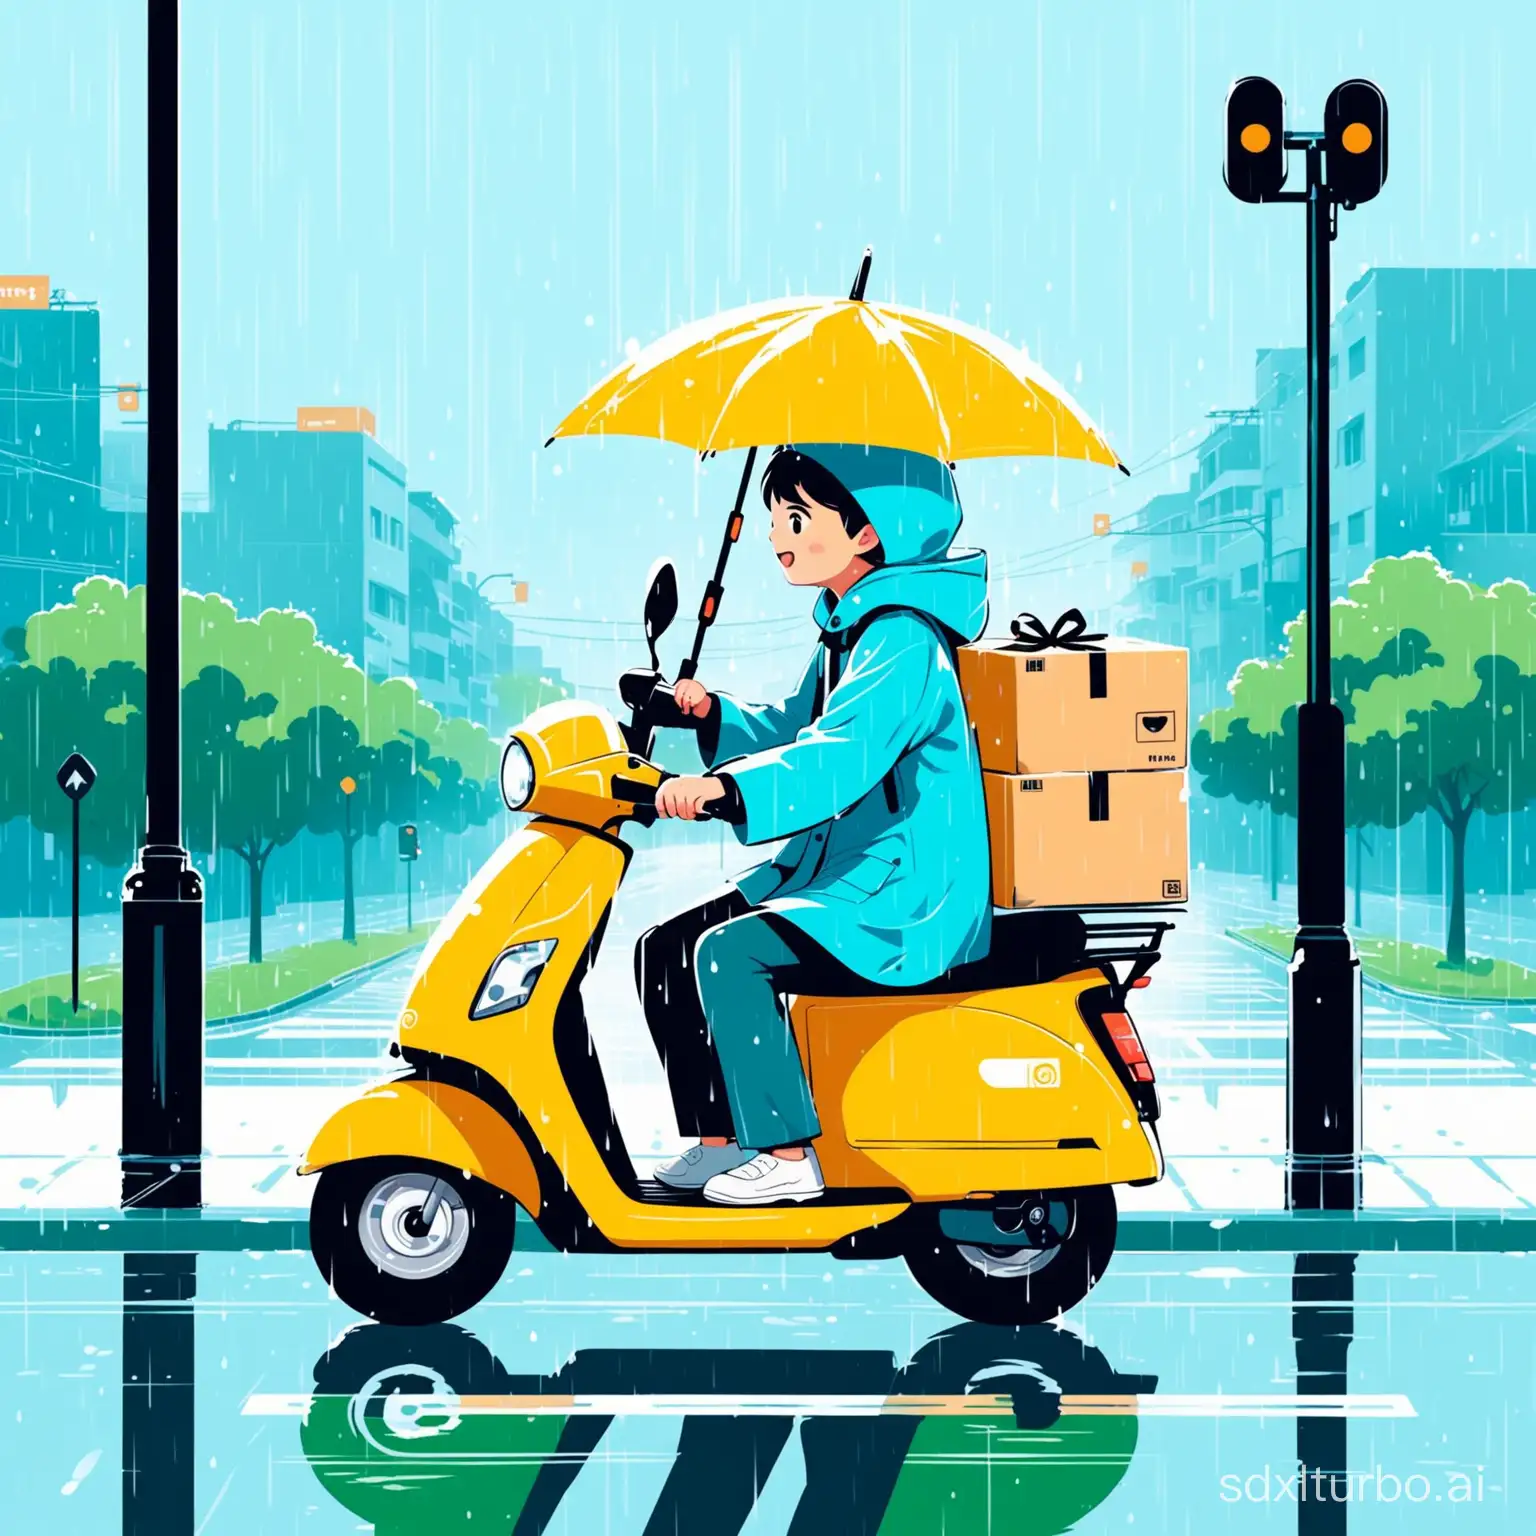 Cute flat illustration style, bright and soft colors, a crossroad on a rainy day, a delivery person riding an electric scooter across the street, carrying a little boy in a blue raincoat on the electric scooter